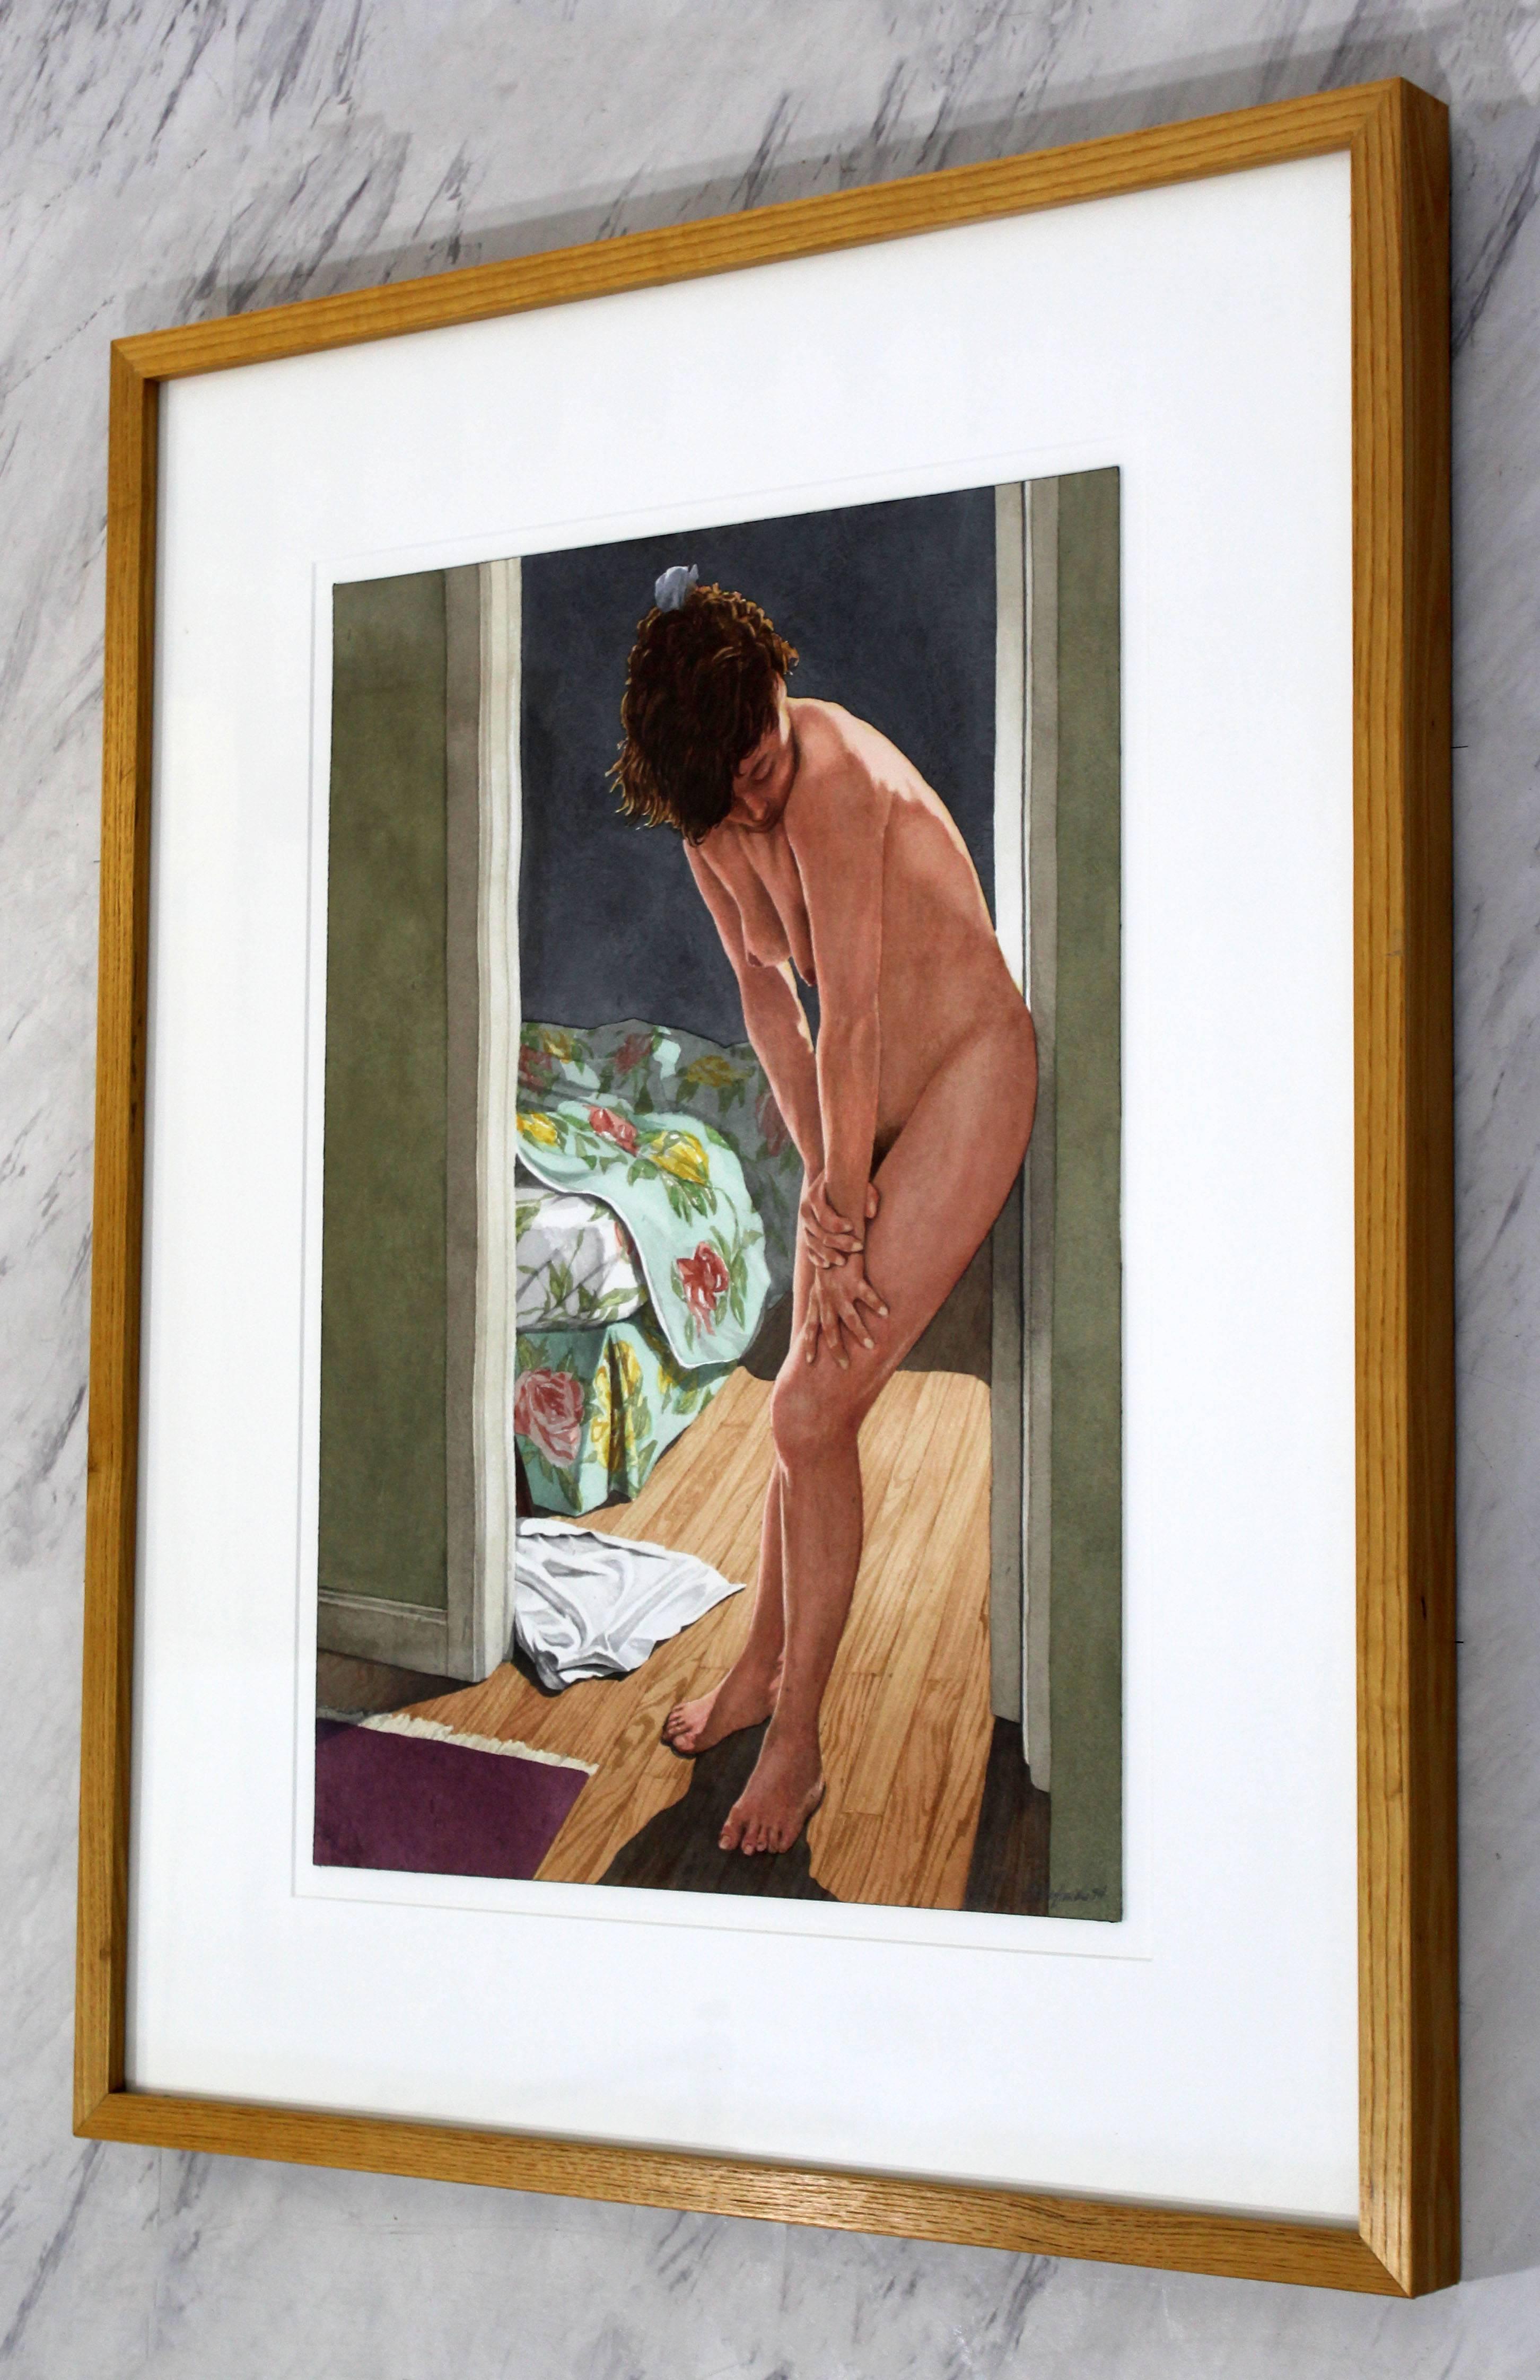 Robert Schefman is a college for creative studies professor, considered one of the best living artists in Michigan today. Schefman paints the human figure as seen here in this watercolor. This piece is untitled, sighed, dated 1994, and measures in